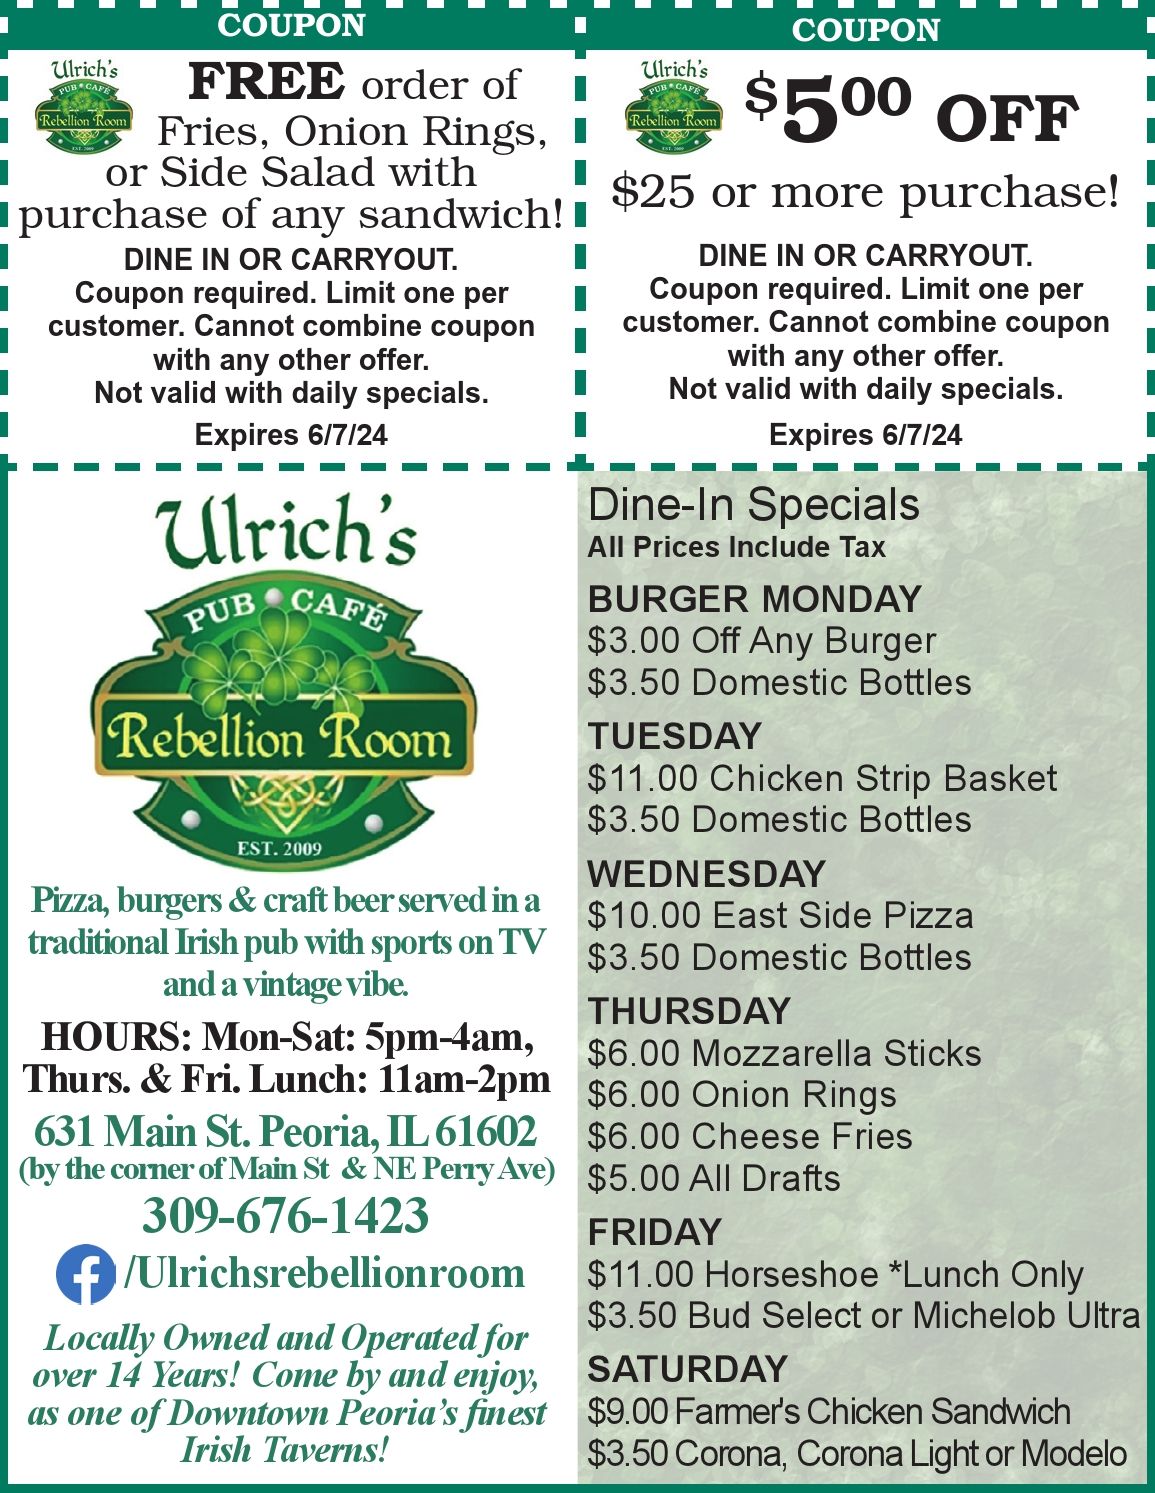 Ulrichs Rebellion Room dine in and carryout $5 off $25 purchase or FREE order of fries, onion rings or salad coupons. Downtown Peoria, IL